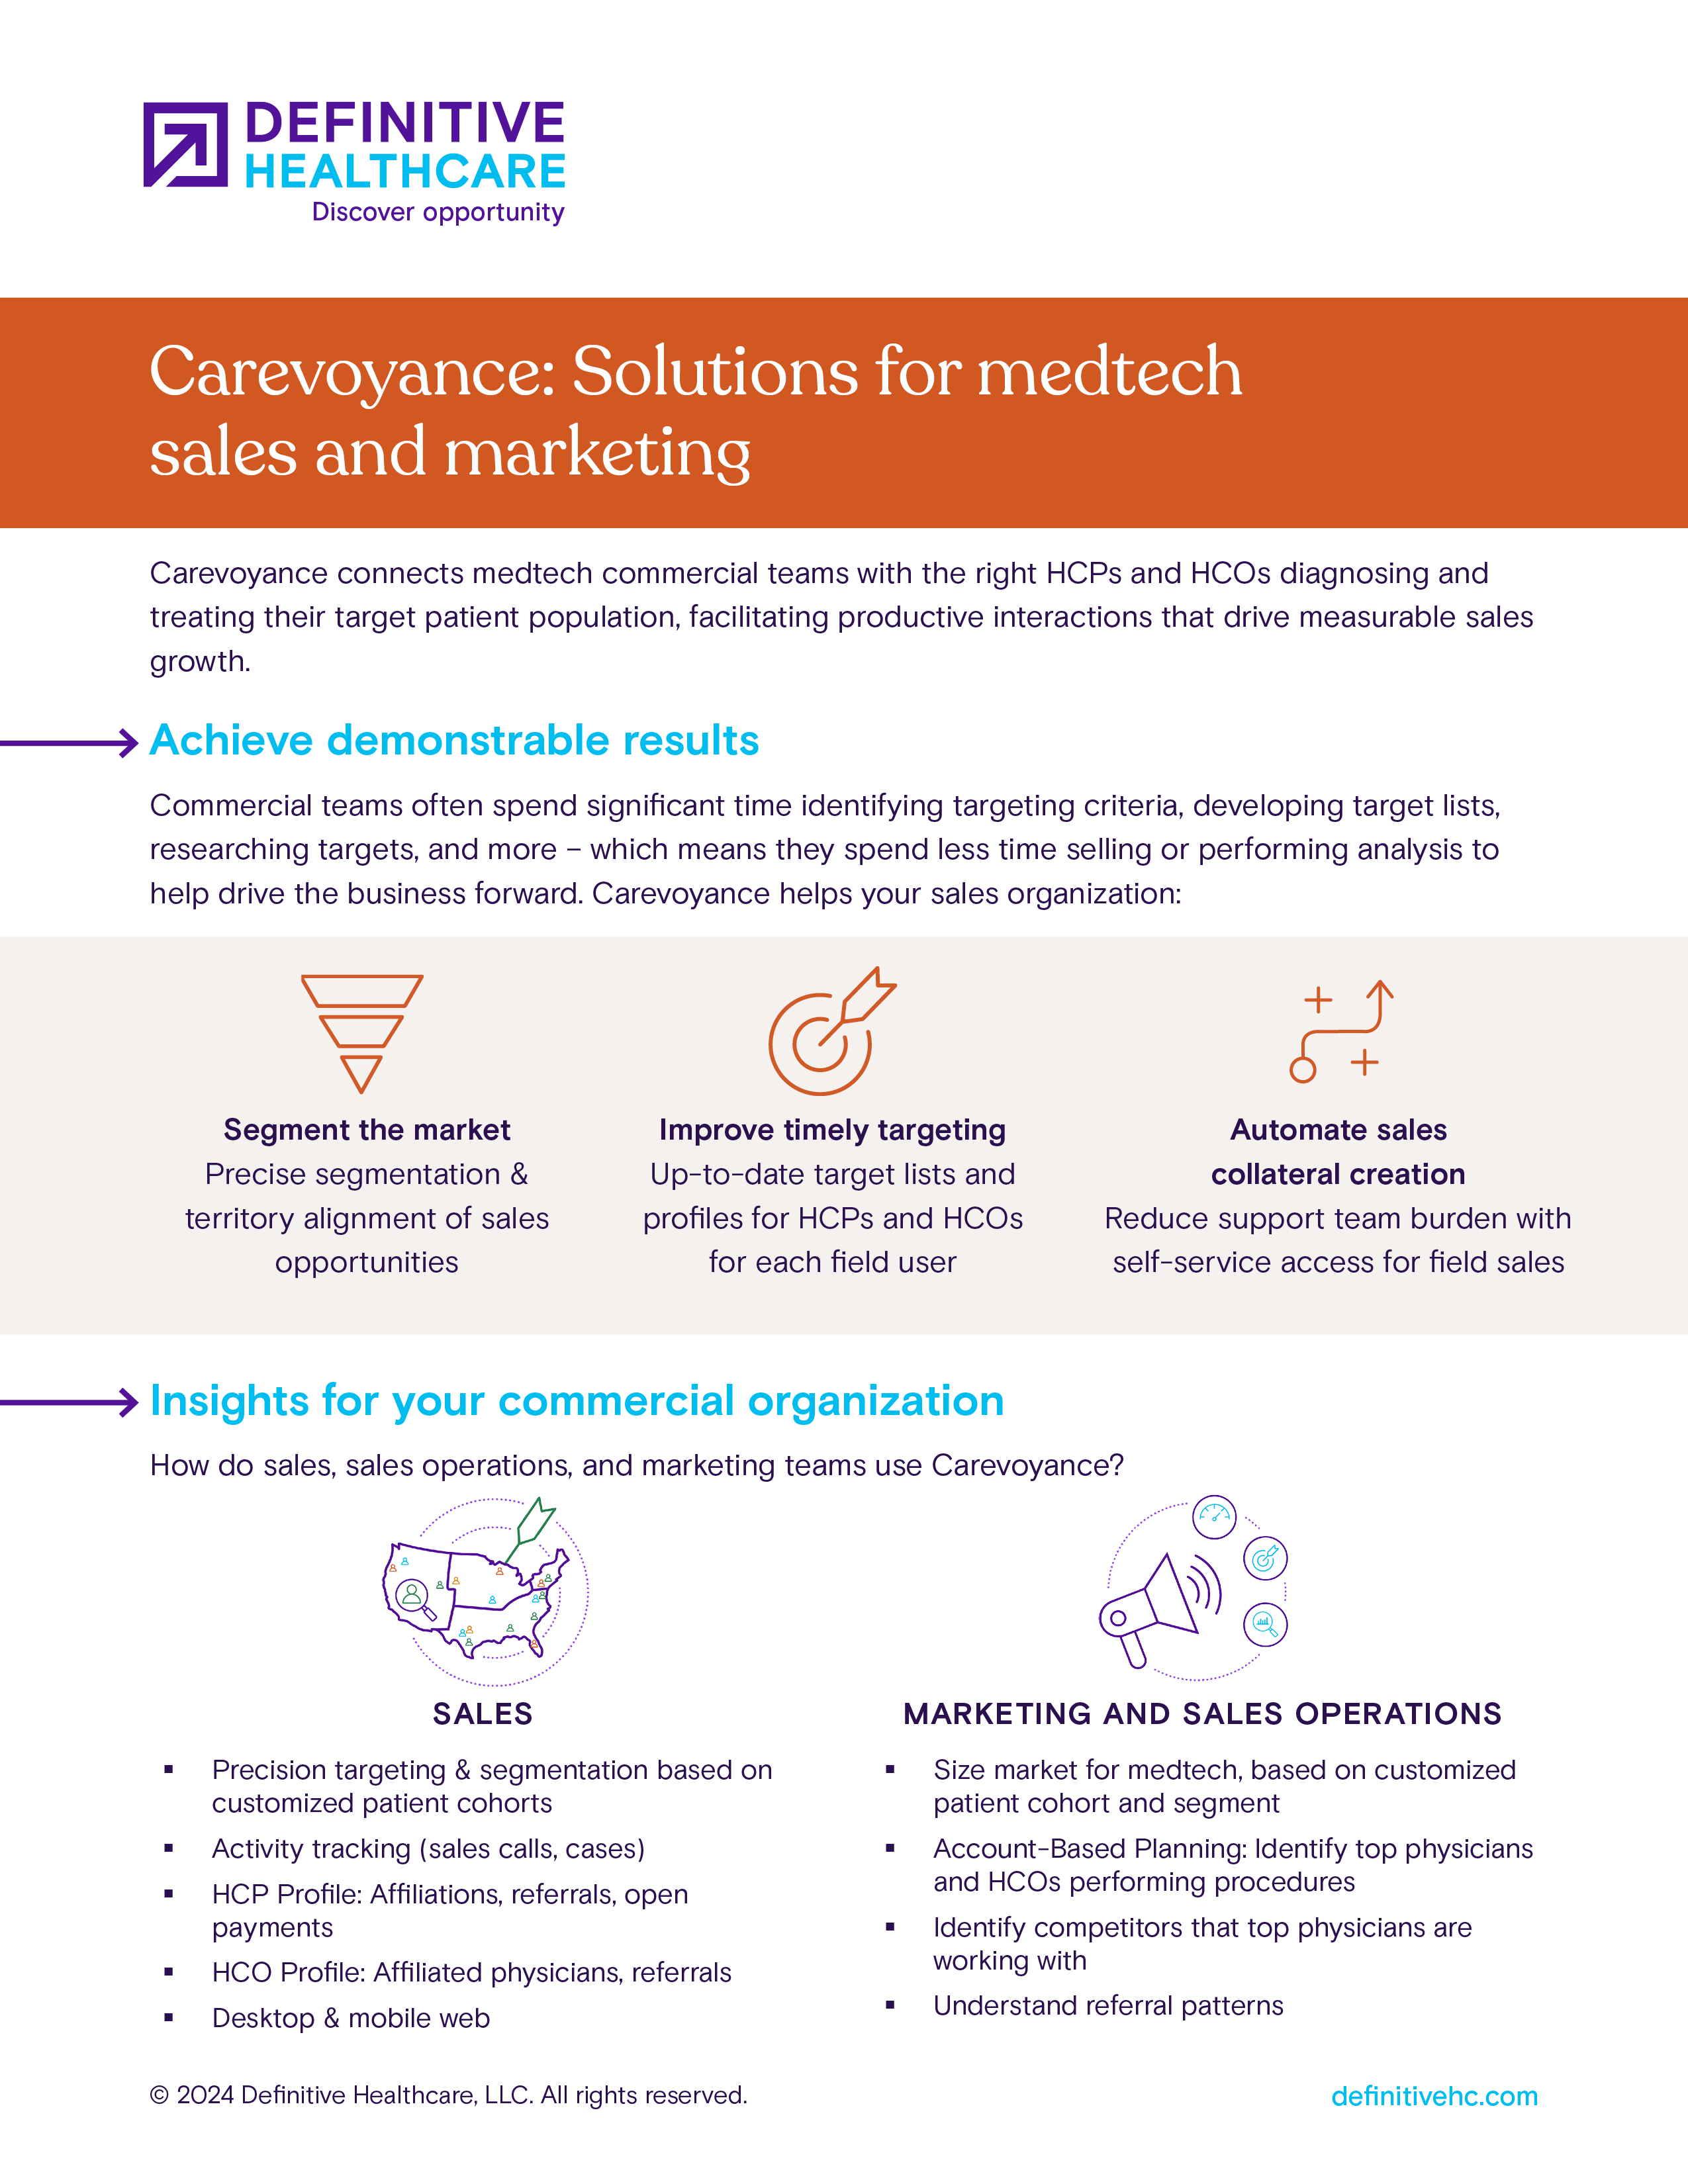 Carevoyance: Solutions for medtech sales and marketing